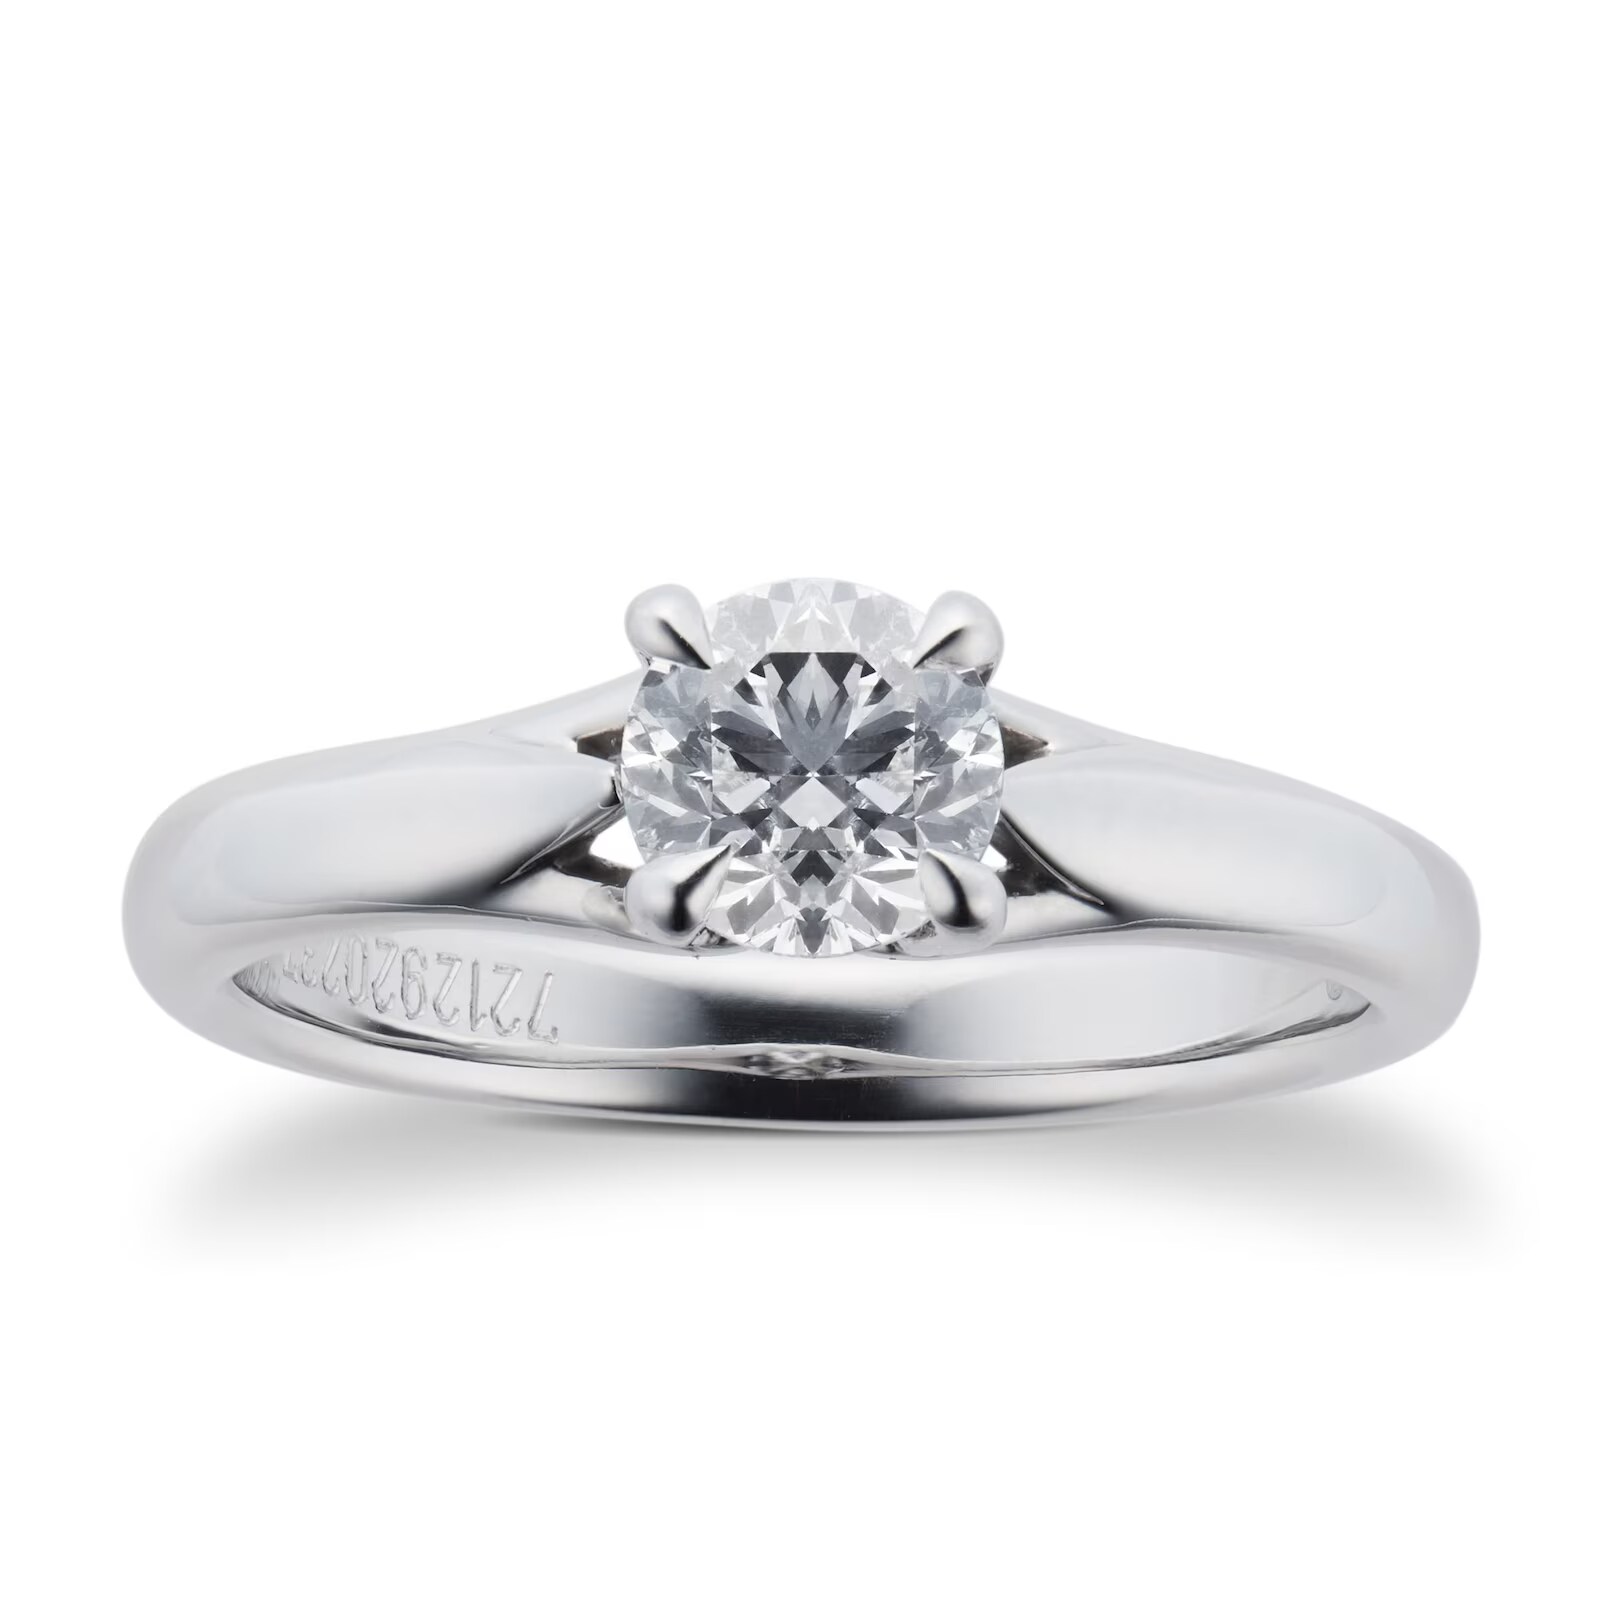 Ena Harkness Engagement Ring 0.70 Carat - Ring Size O